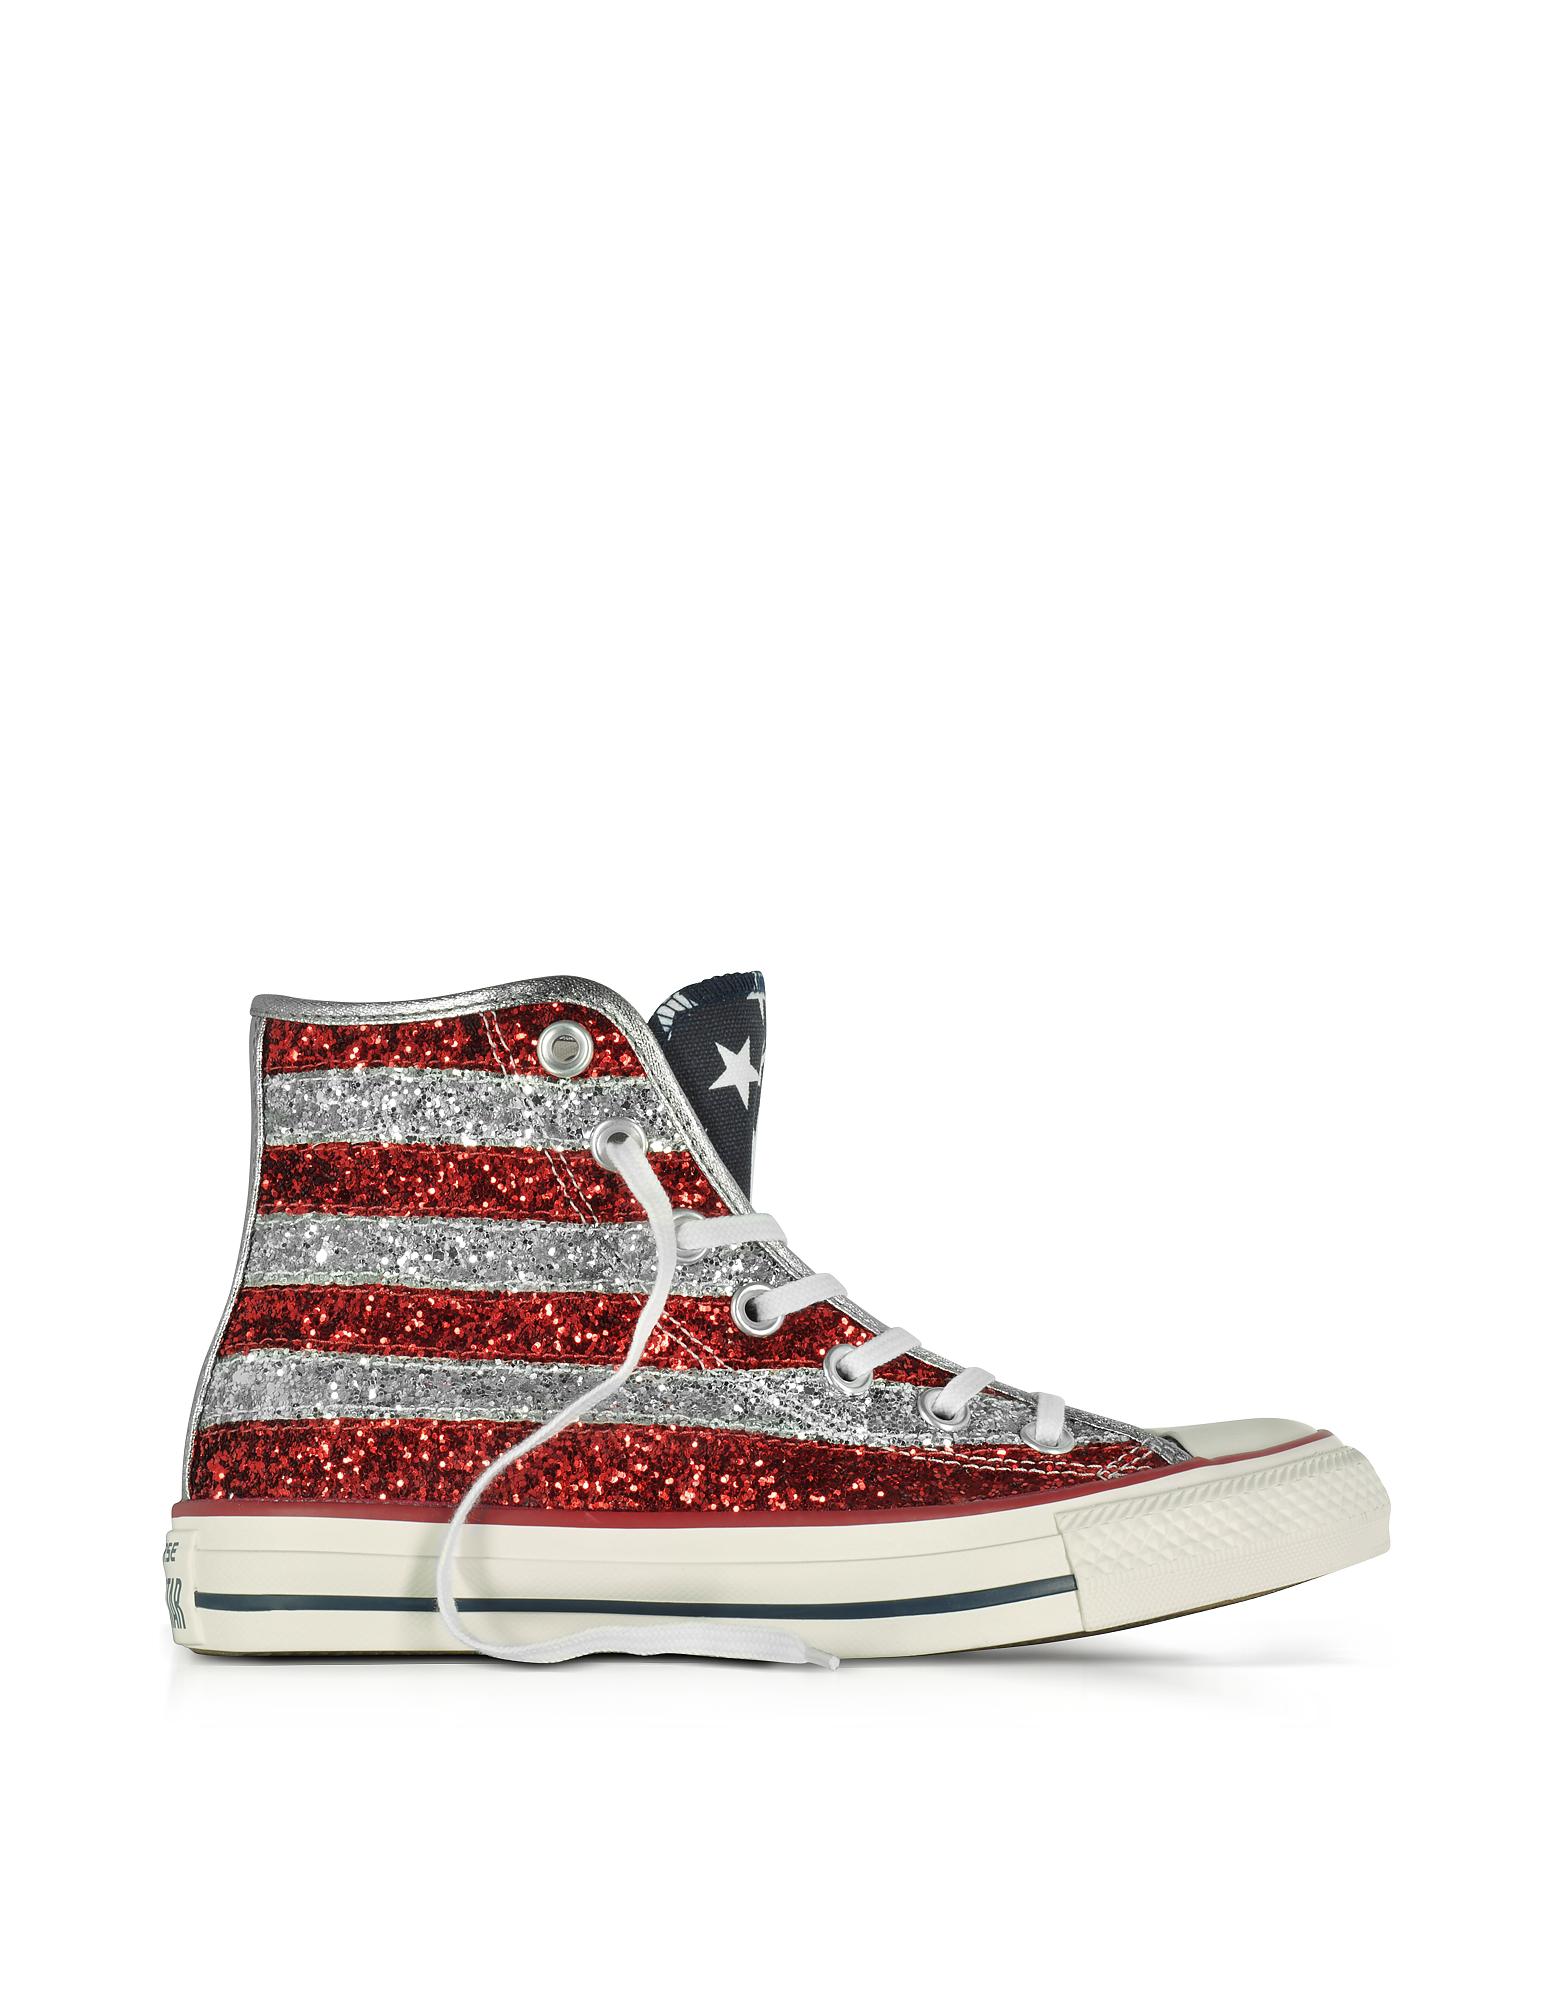 red glitter converse all stars Online Shopping for Women, Men, Kids Fashion  \u0026 Lifestyle|Free Delivery \u0026 Returns! -